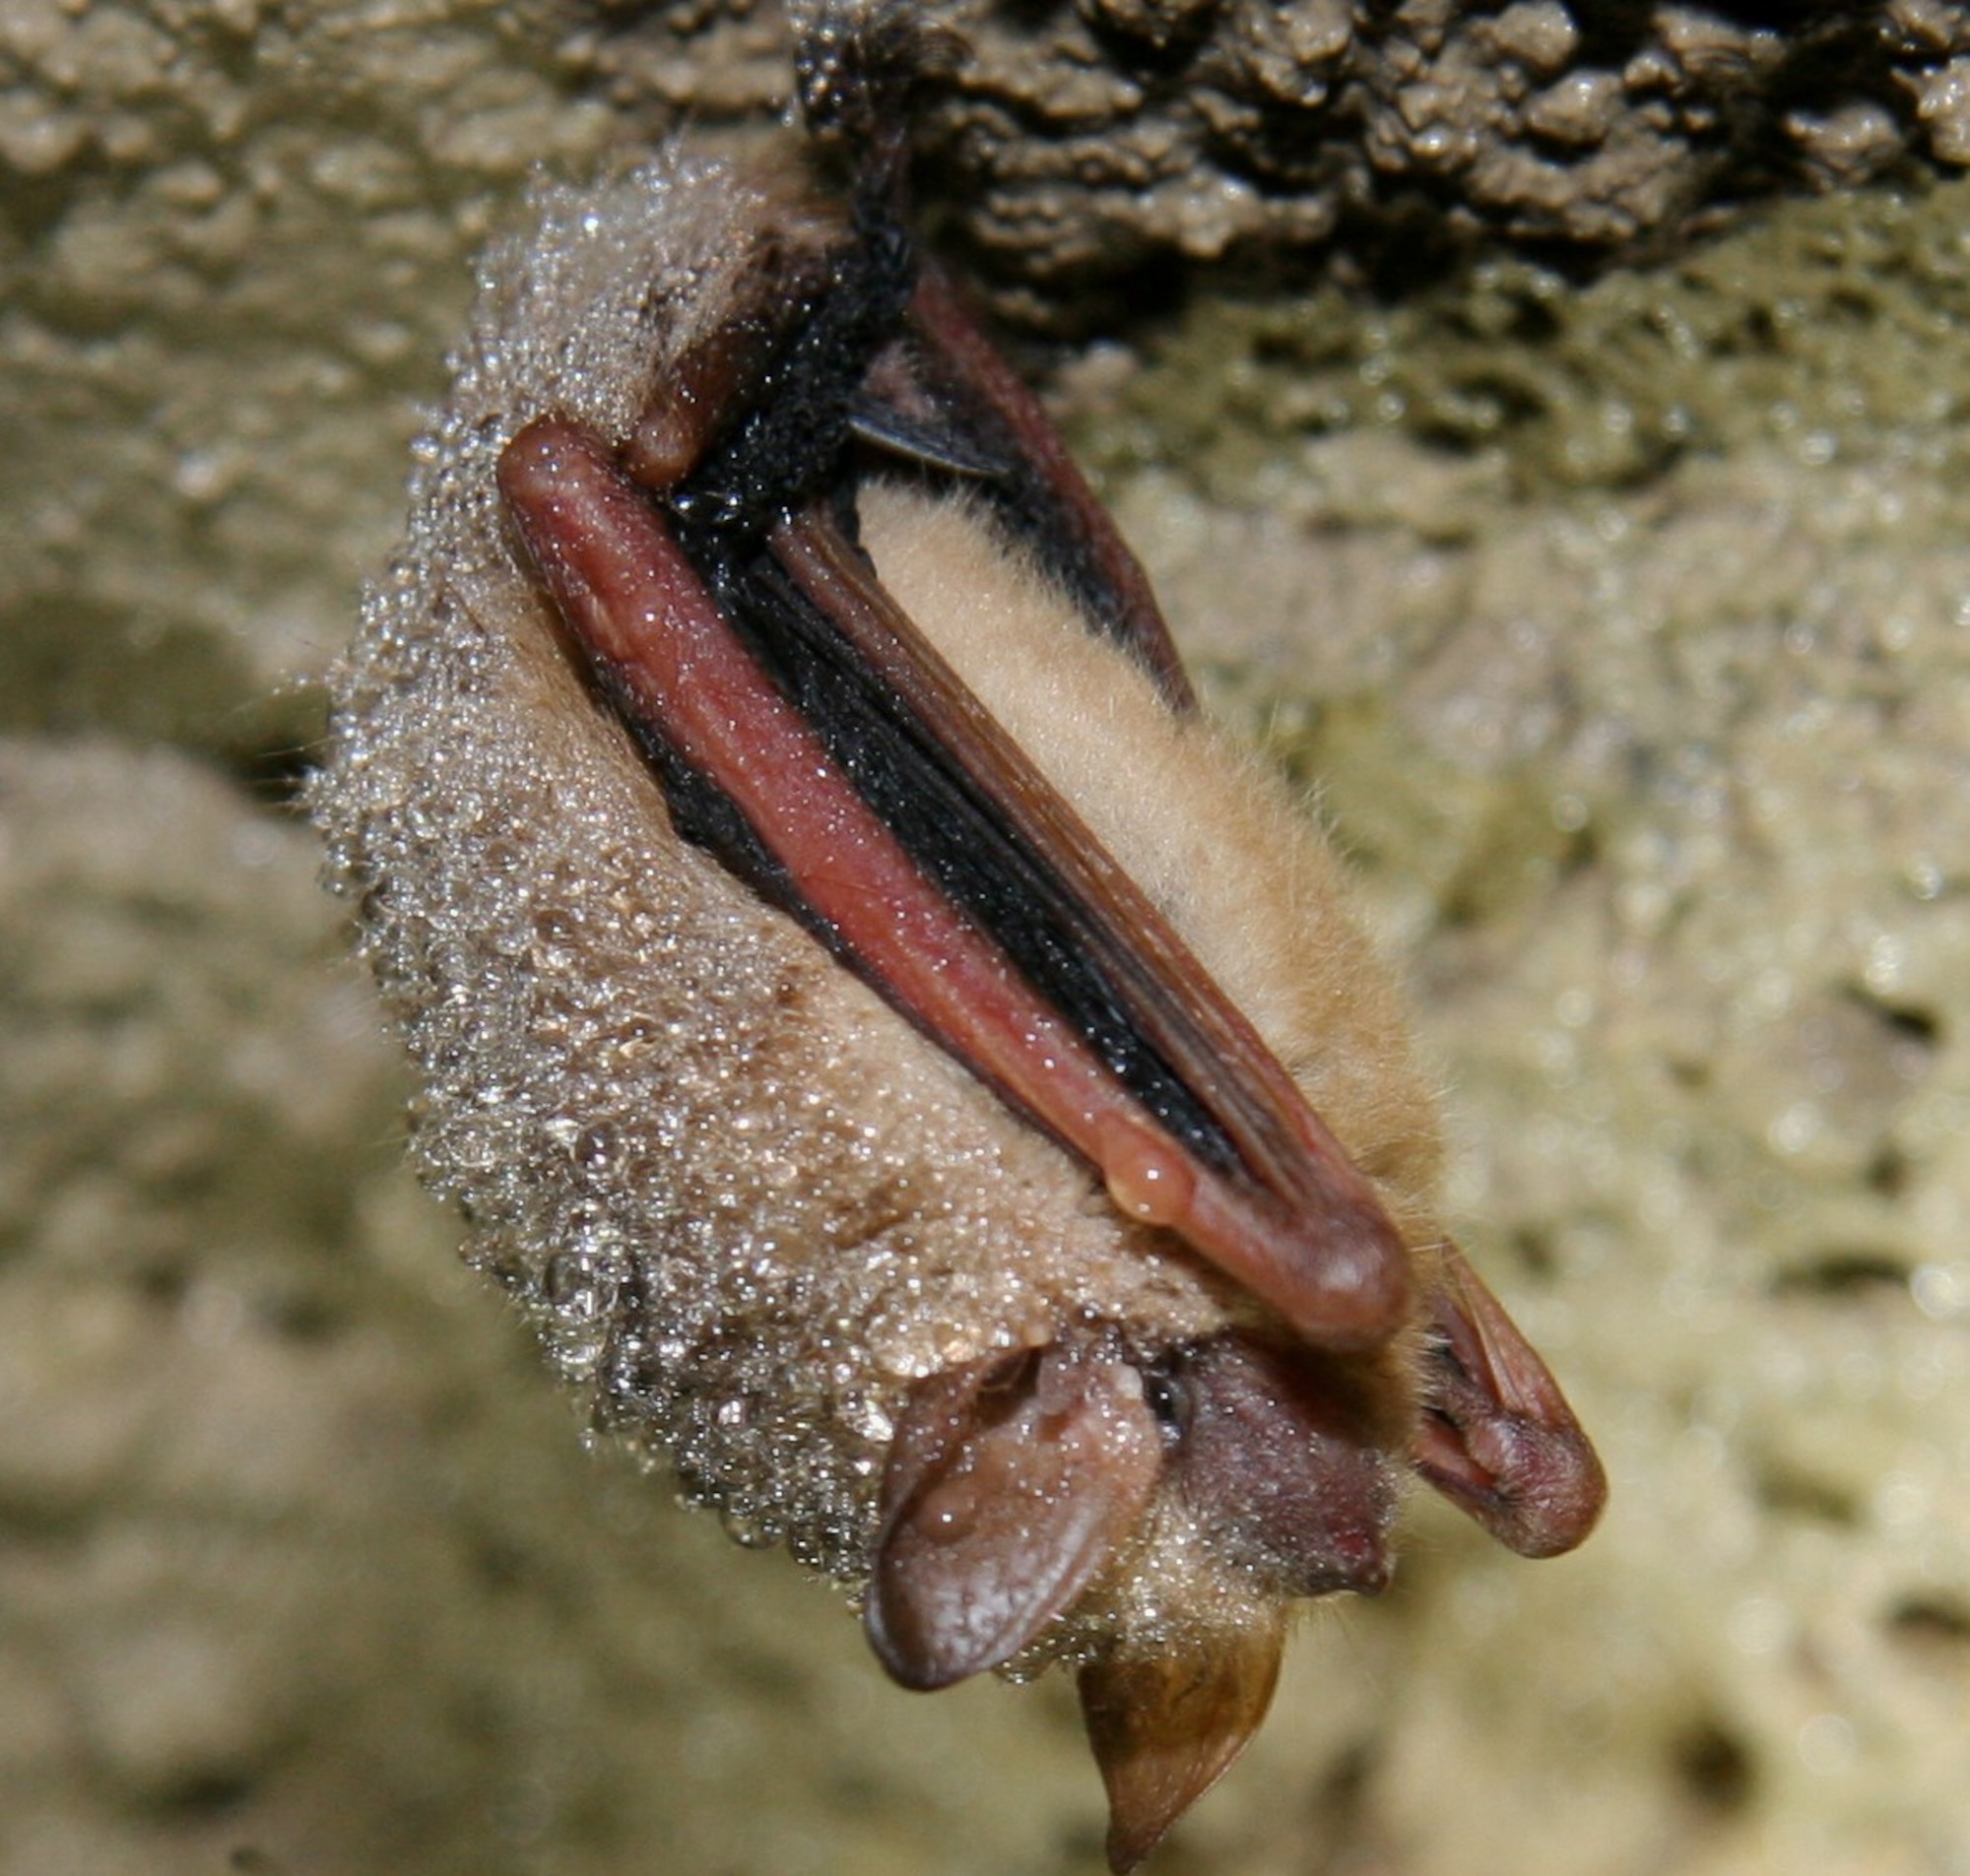 Tricolored bats can often be seen with a layer of condensation when hibernating in caves. They spend summer in trees at Arnold Air Force Base. (U.S. Air Force photo by John Lamb)